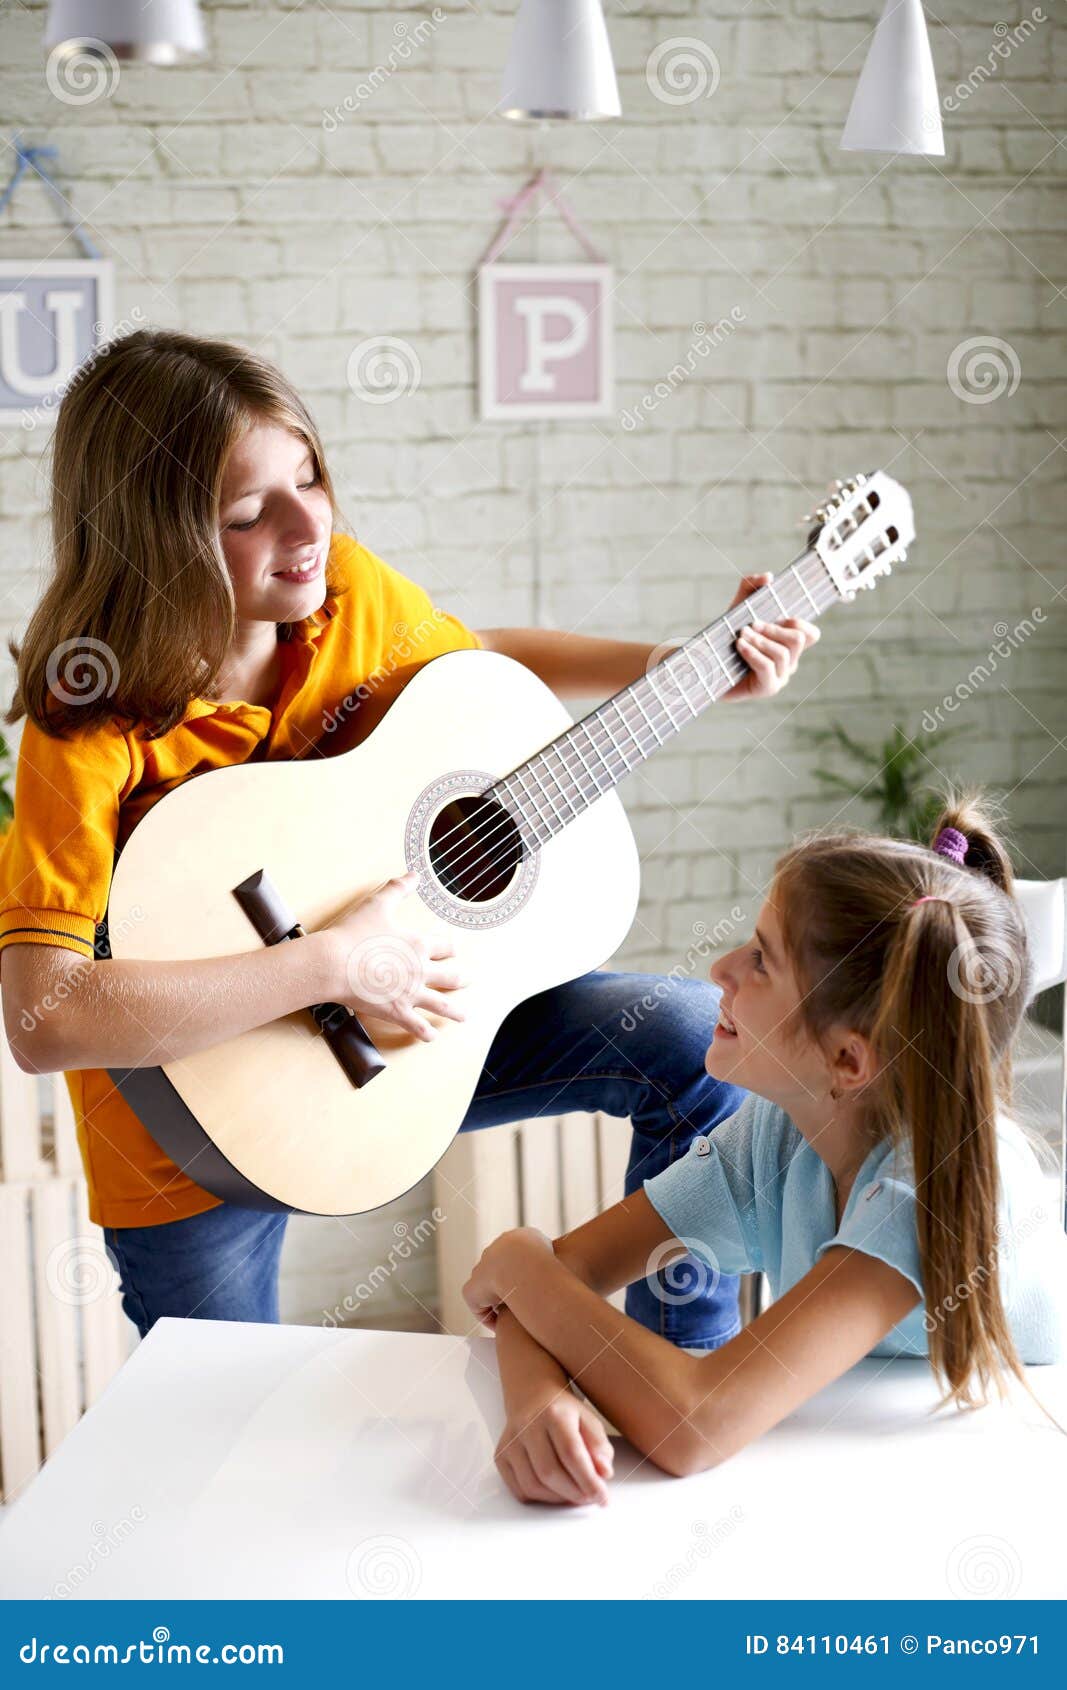 Children Learn To Play Guitar Stock Image Image of class